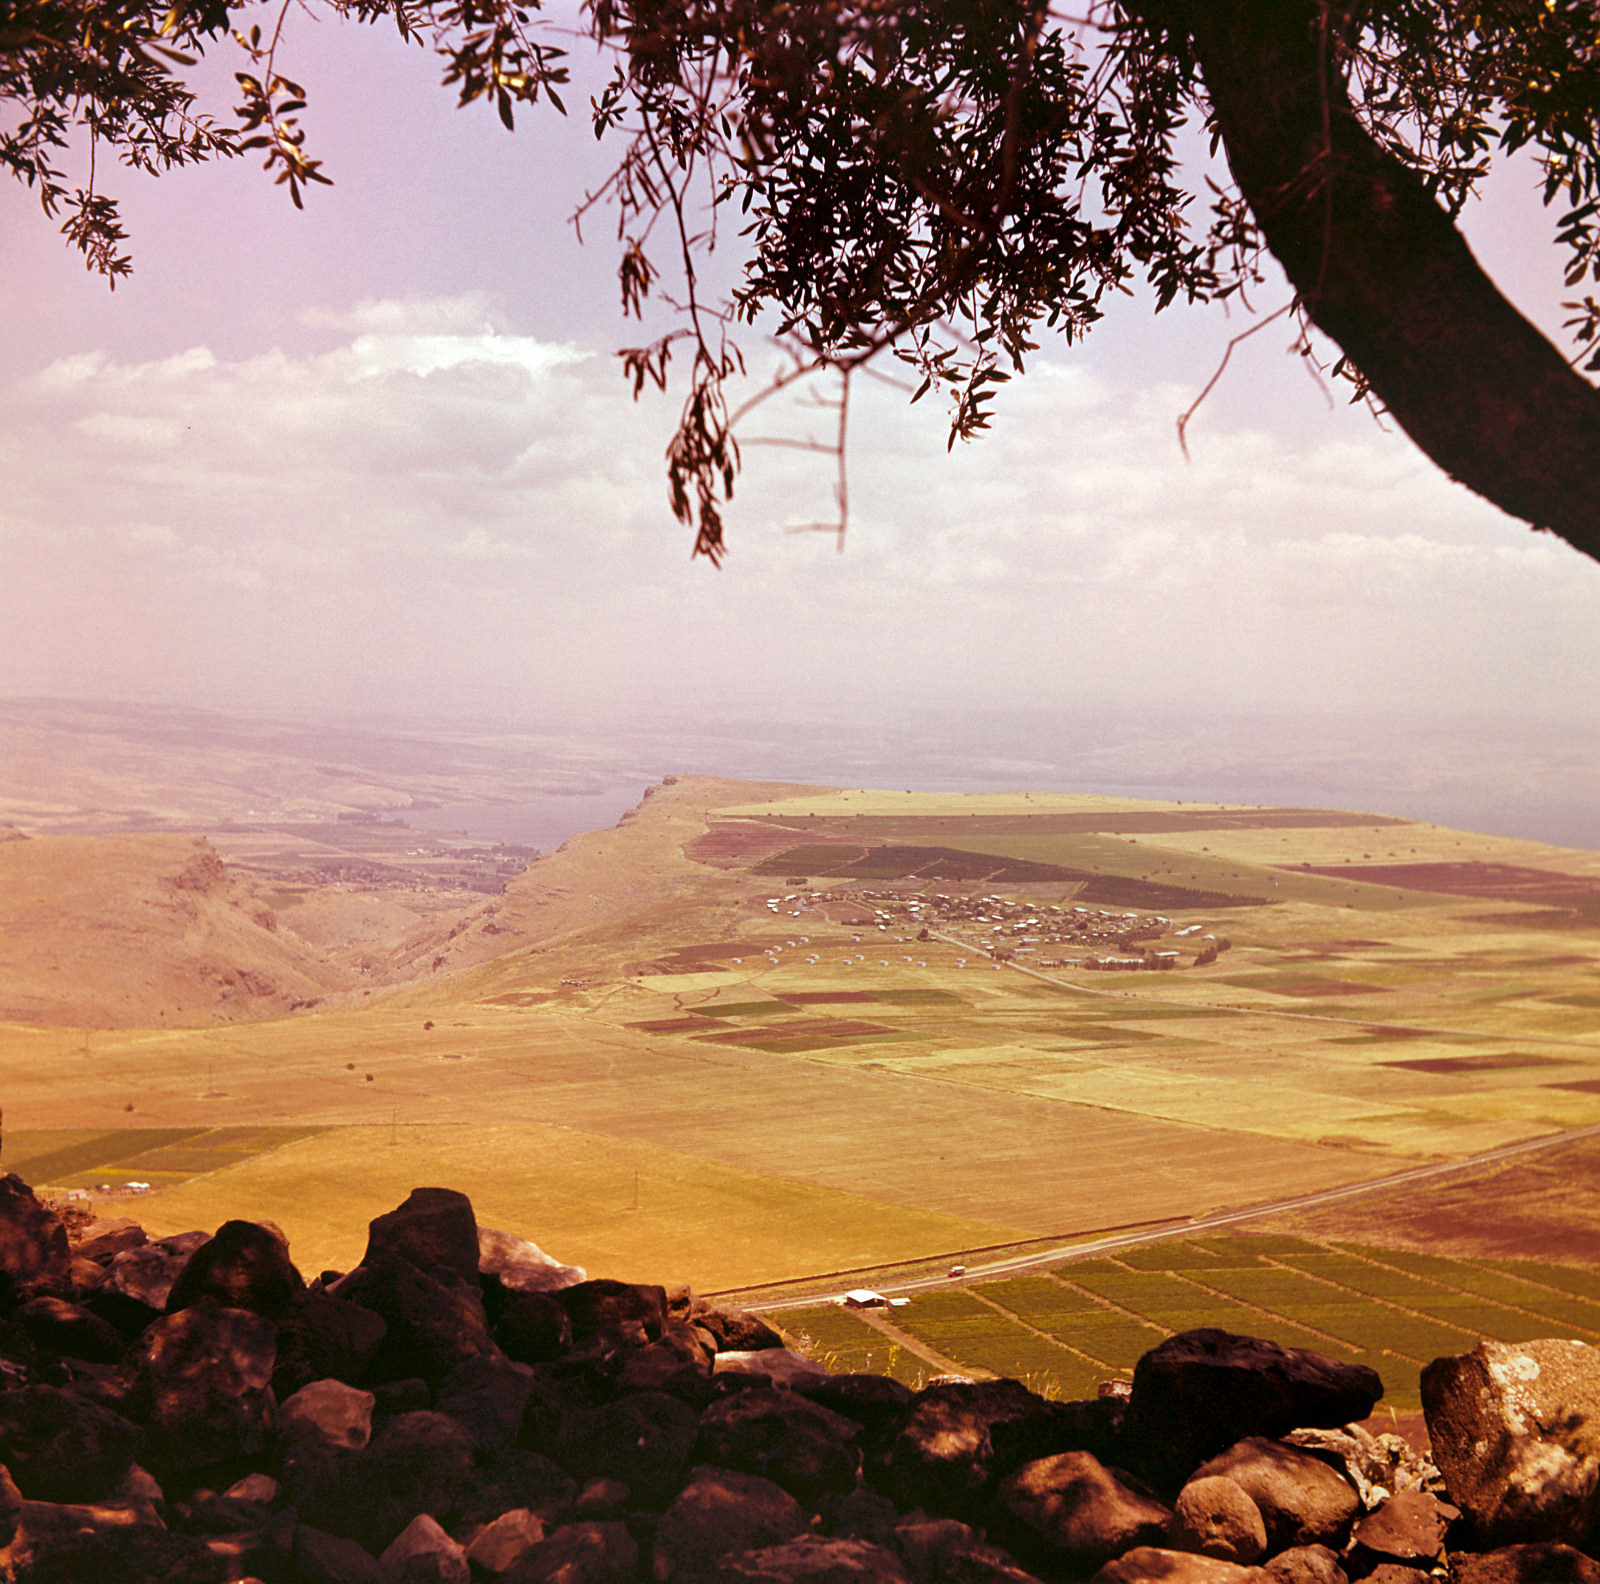 A view of Arbel and Sea of Galilee from Horns of Hattin. Photograph by David Bivin from the collection "Views That Have Vanished: The Photographs of David Bivin."